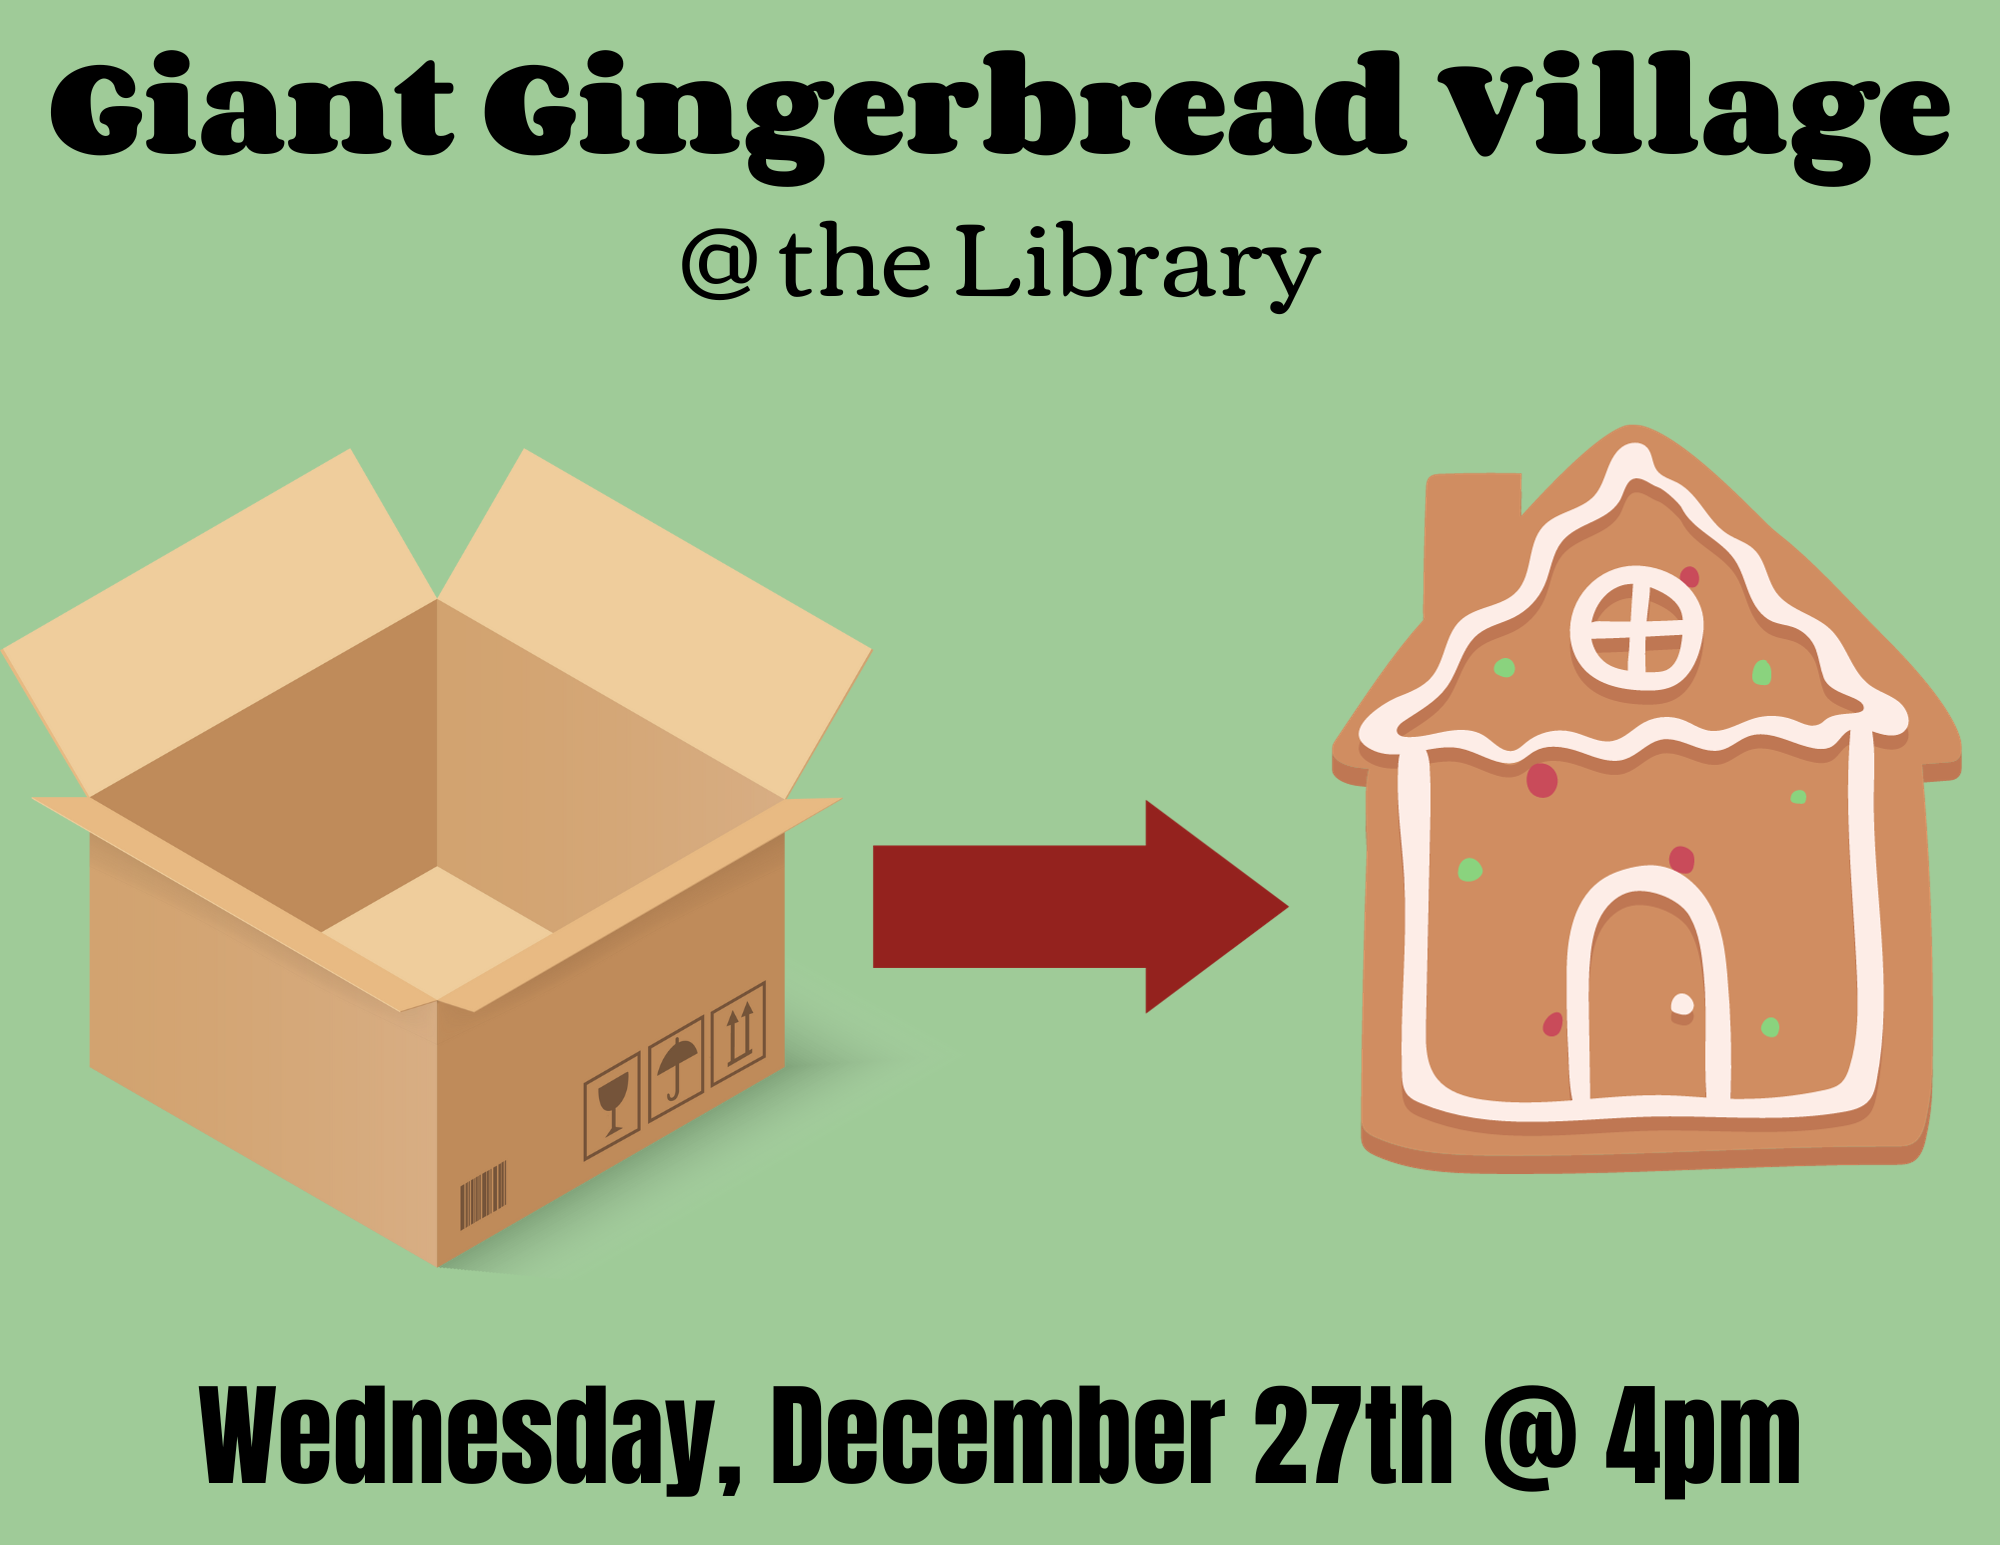 Constructing a Giant Gingerbread Village